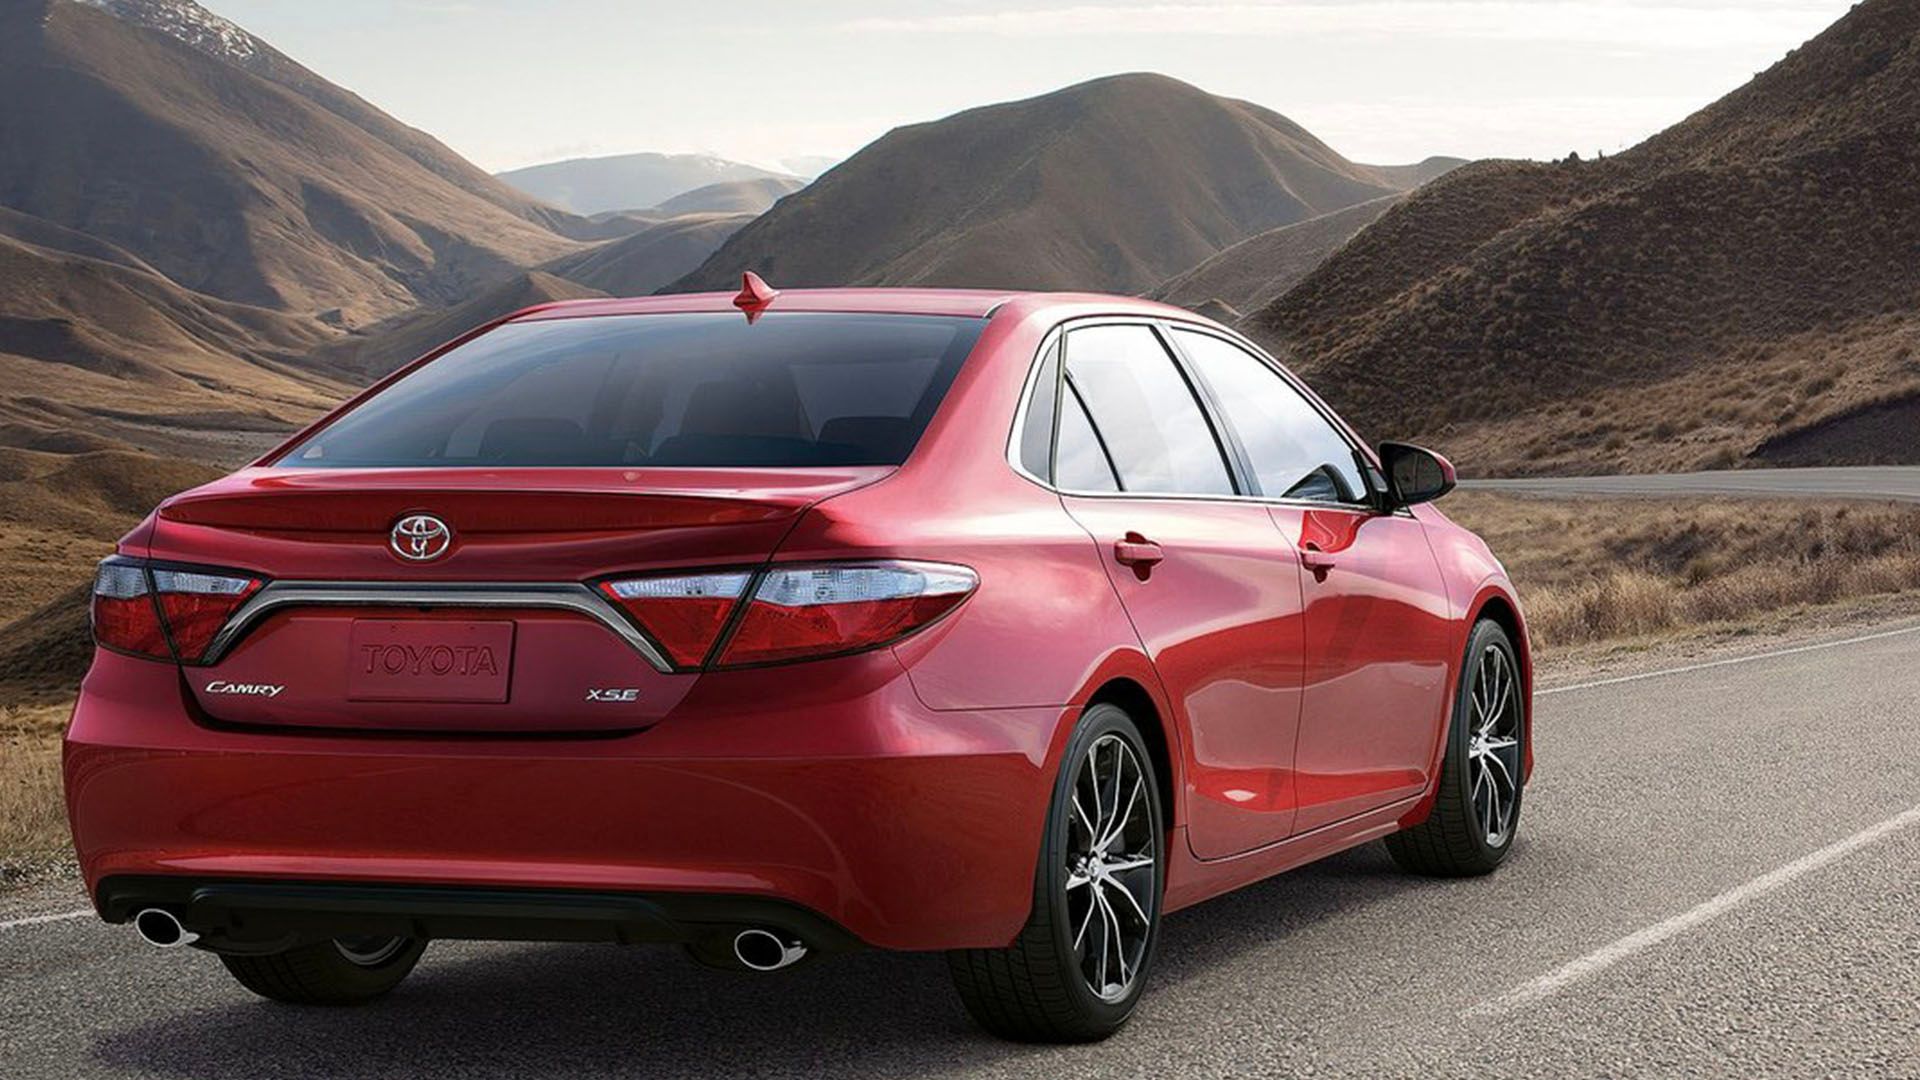 2017 Toyota Camry rear three quarters on the road